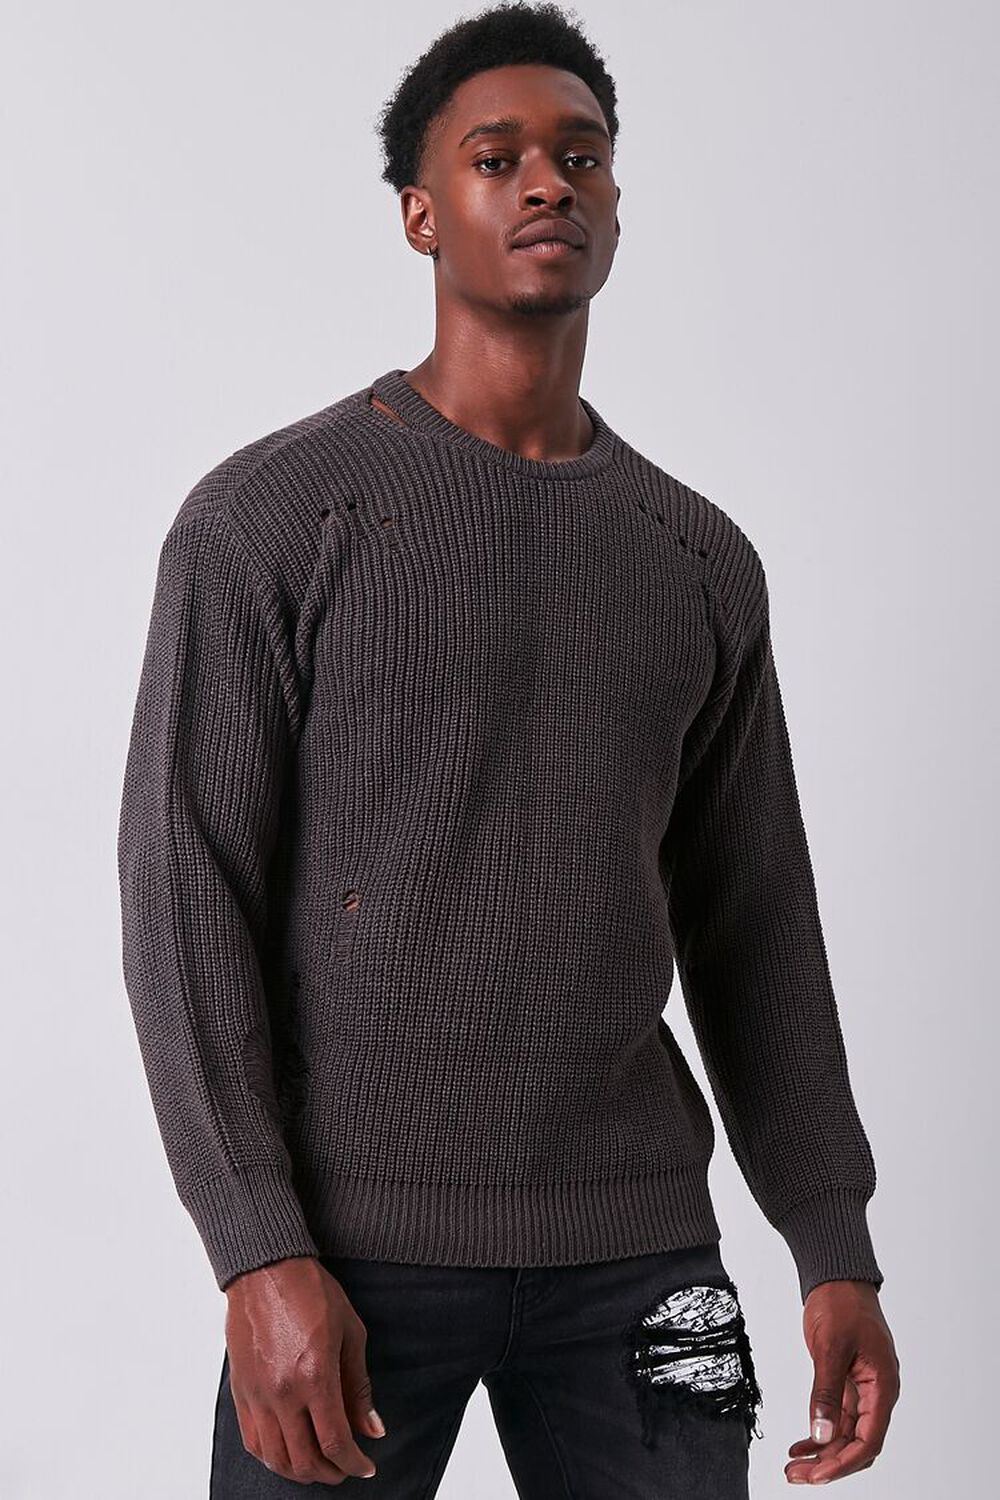 CHARCOAL Ribbed Distressed Sweater, image 1